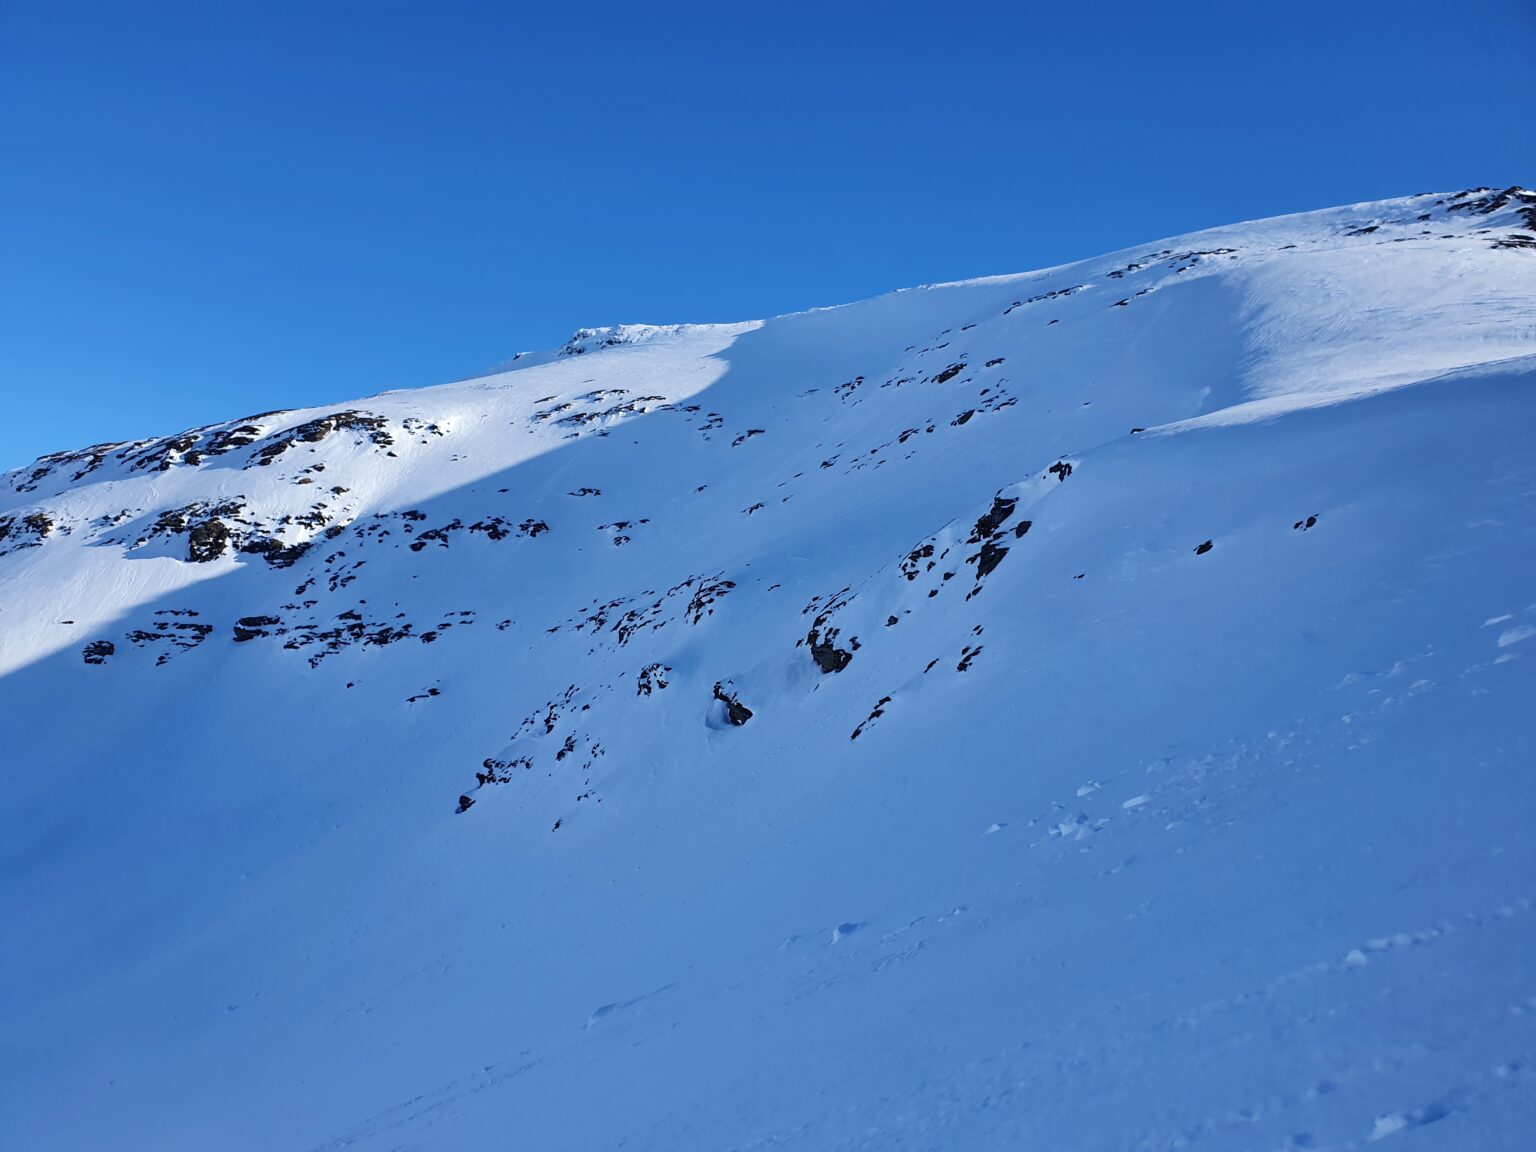 A closer look at the North bowl of Brattlifjellet